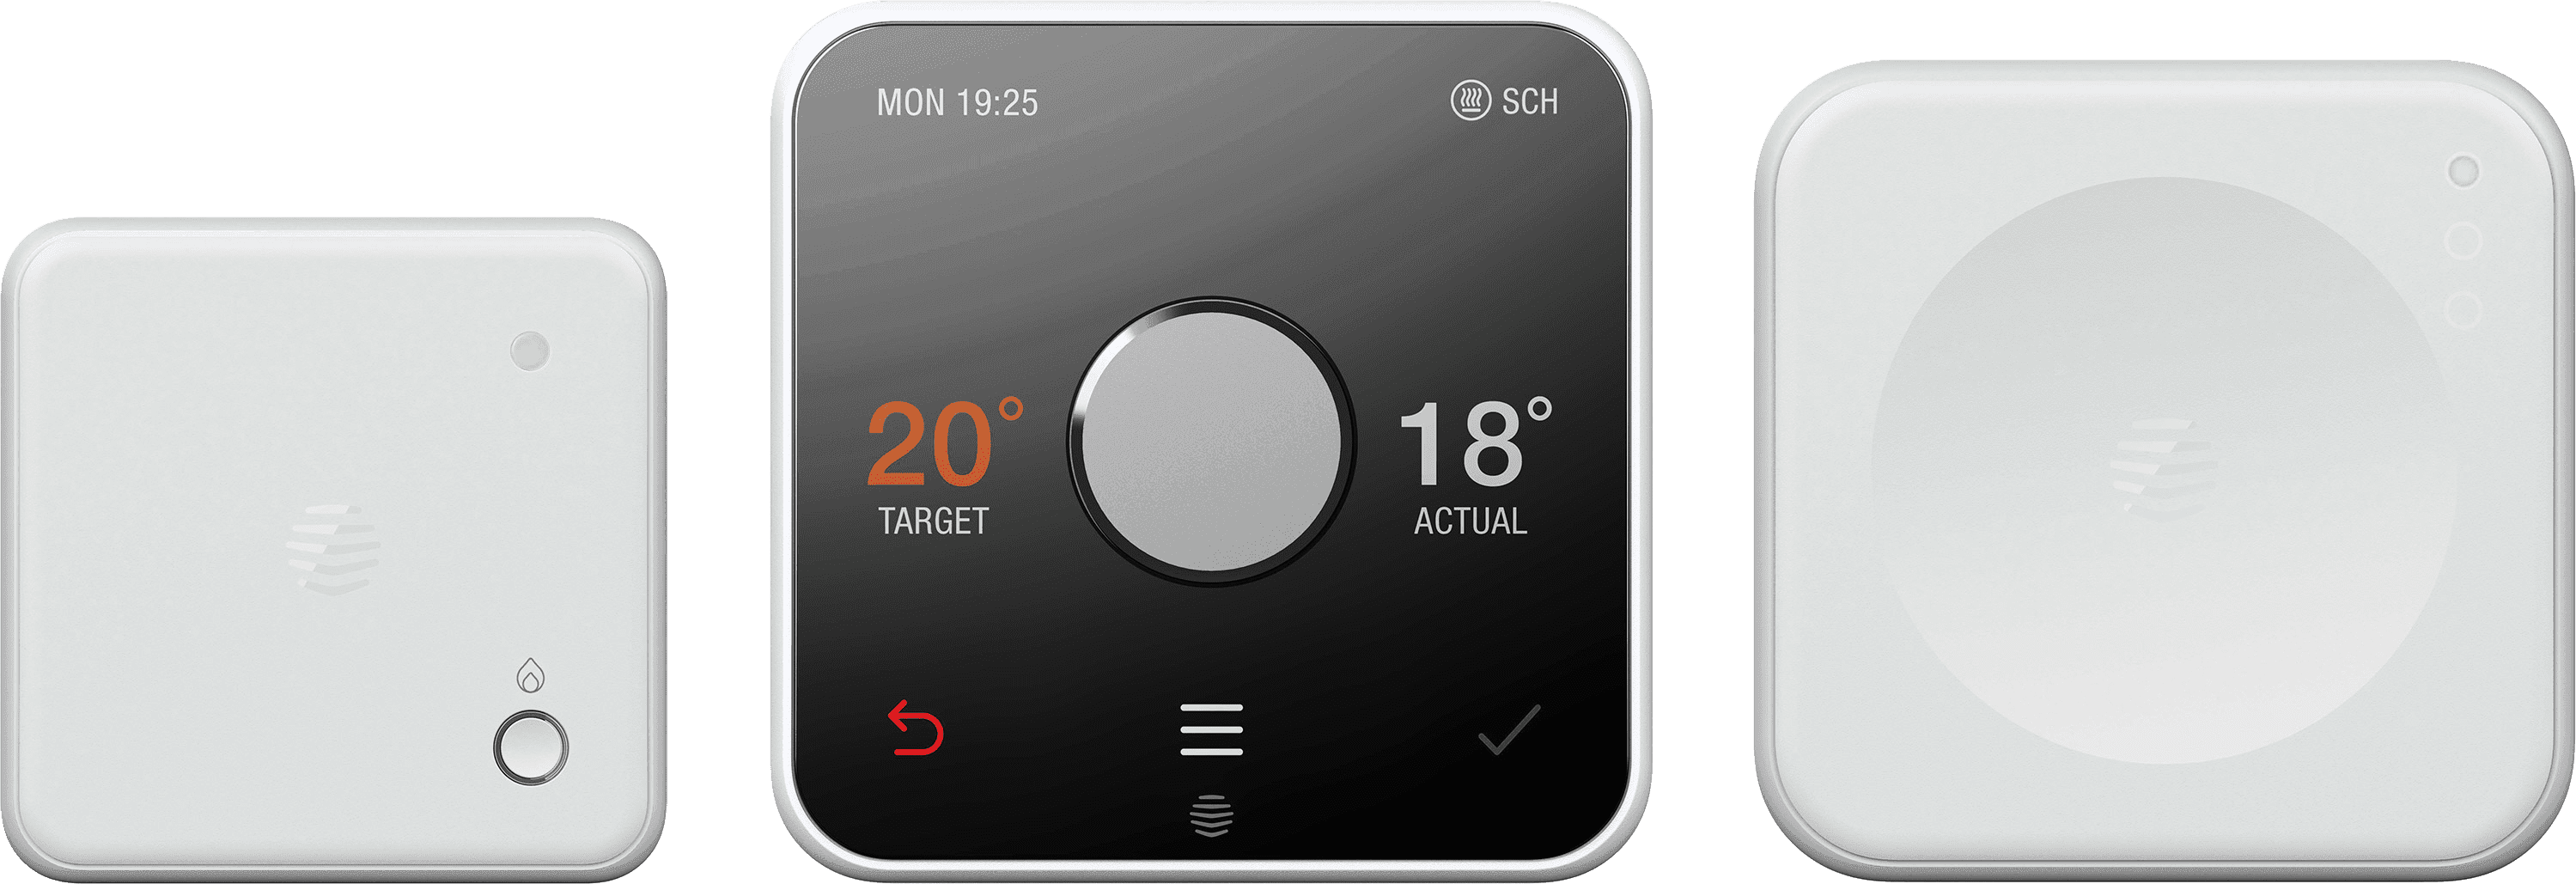 Hive Active Heating V3 For Combi Boilers Smart Thermostat - Self Install - White, White